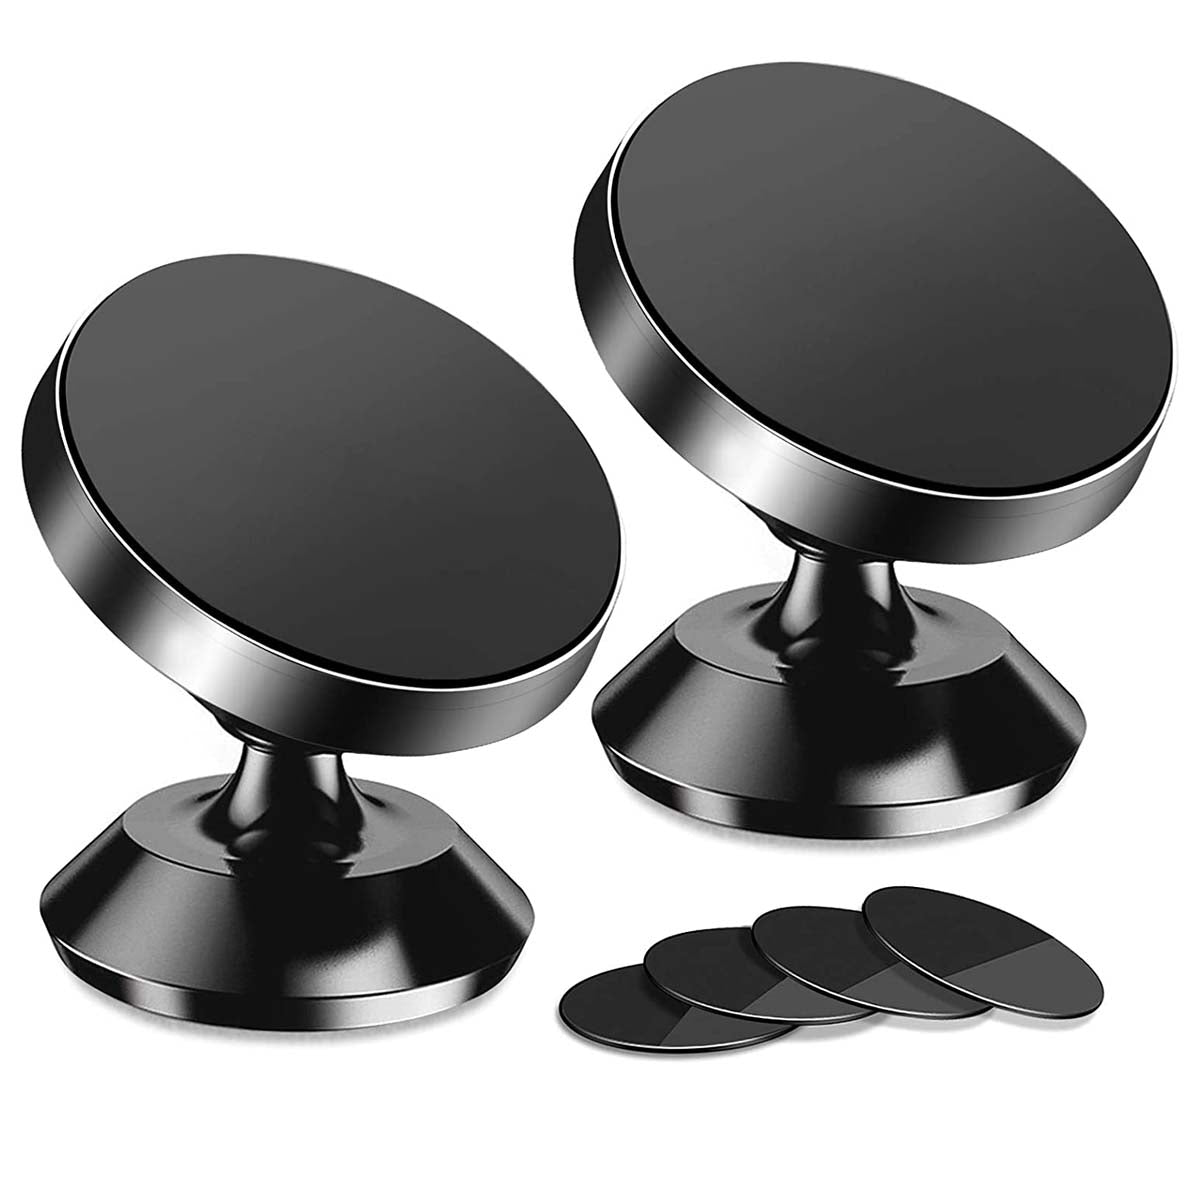 [2 Pack ] Magnetic Phone Mount, Custom For Cars, [ Super Strong Magnet ] [ with 4 Metal Plate ] car Magnetic Phone Holder, [ 360° Rotation ] Universal Dashboard car Mount Fits All Cell Phones, Car Accessories UE13982